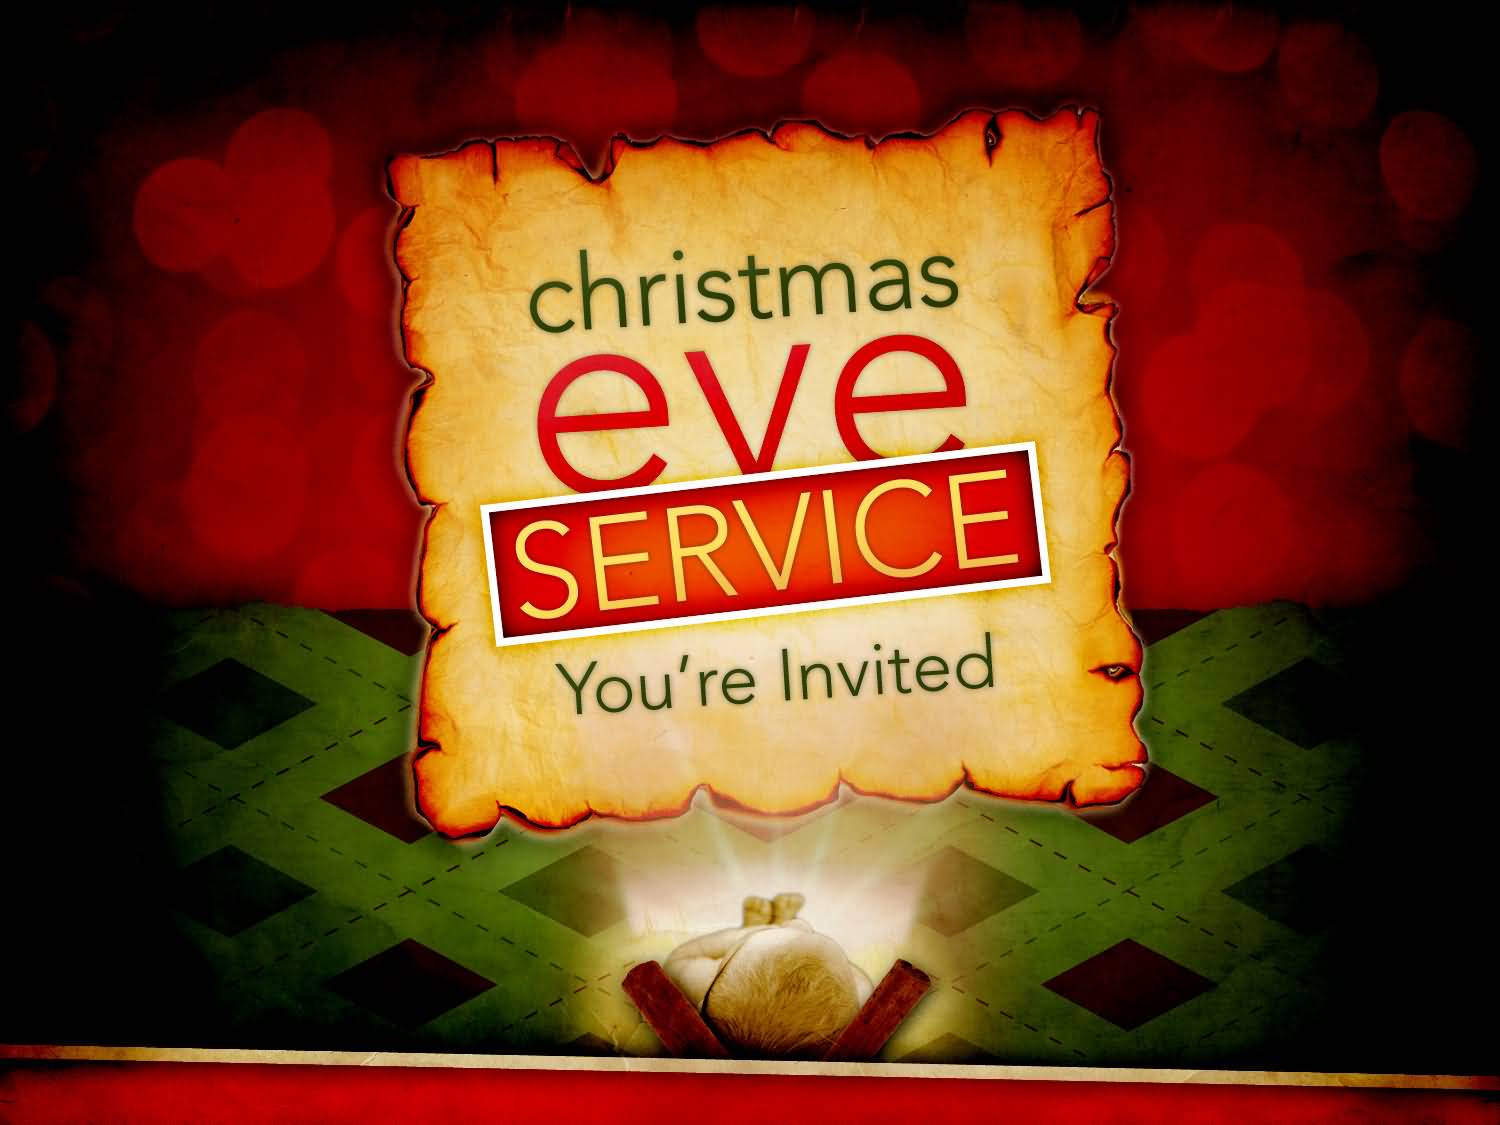 Christmas Eve Service You're Invited